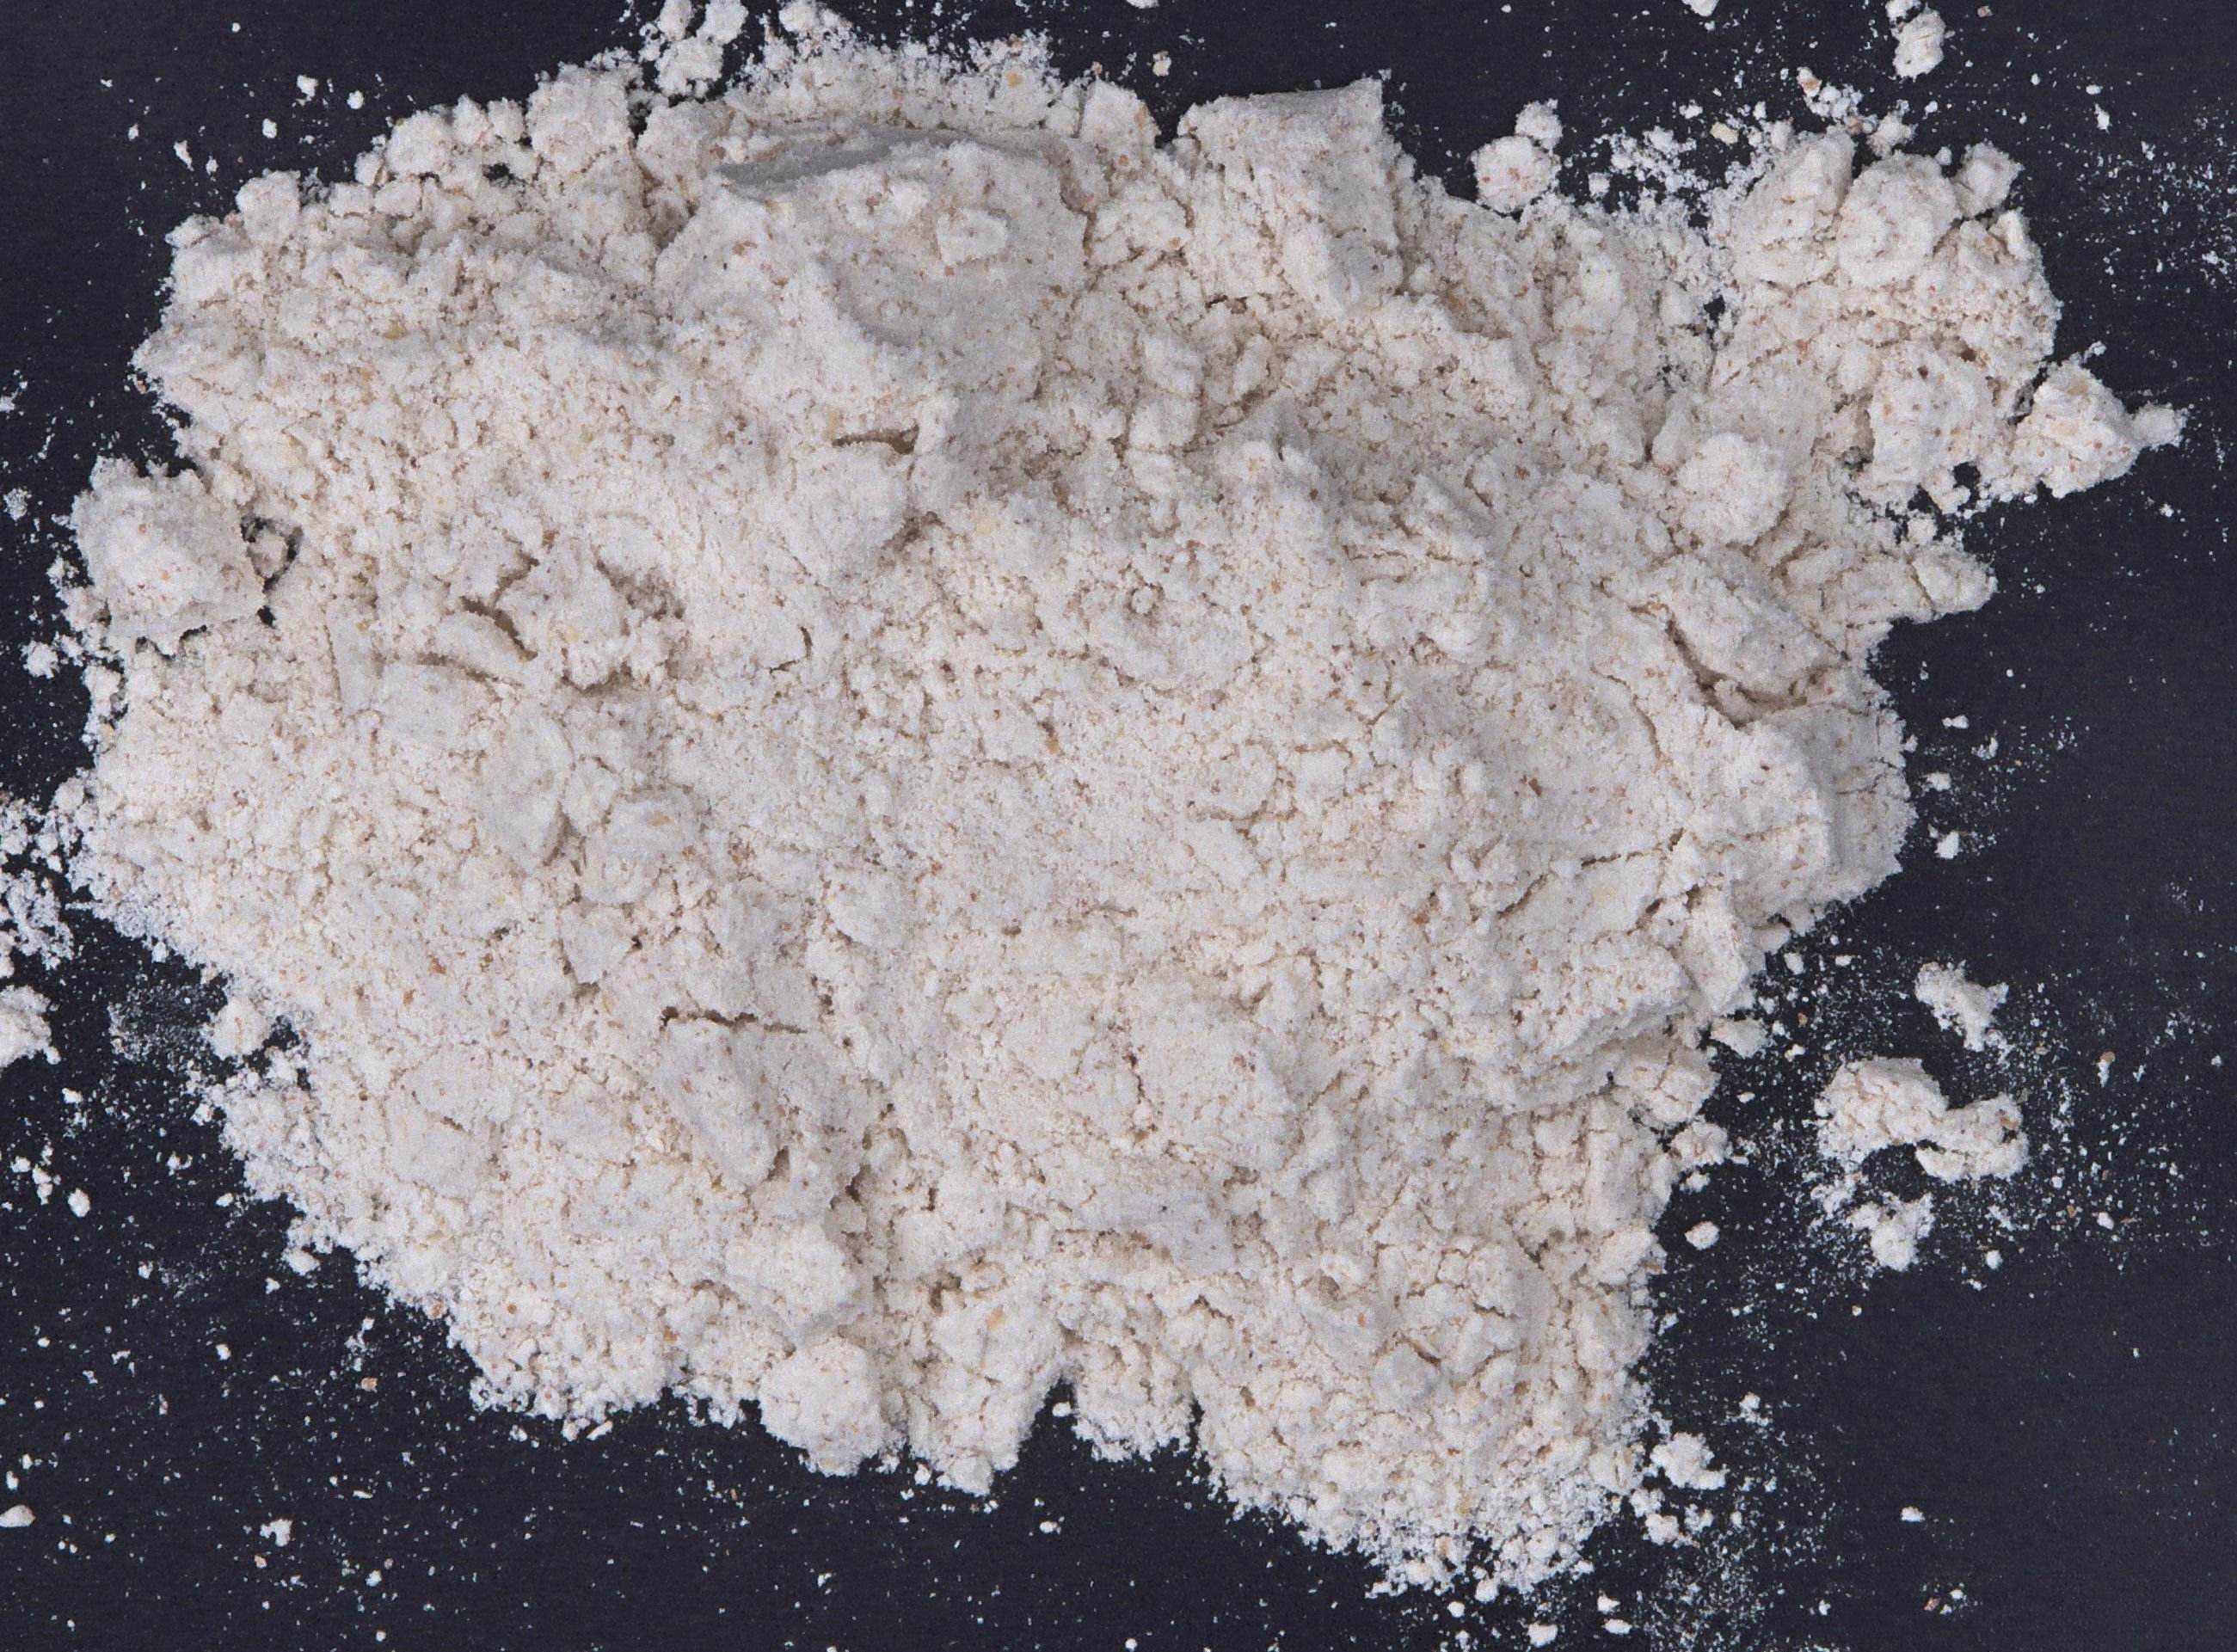 Creatine in one of its many forms.